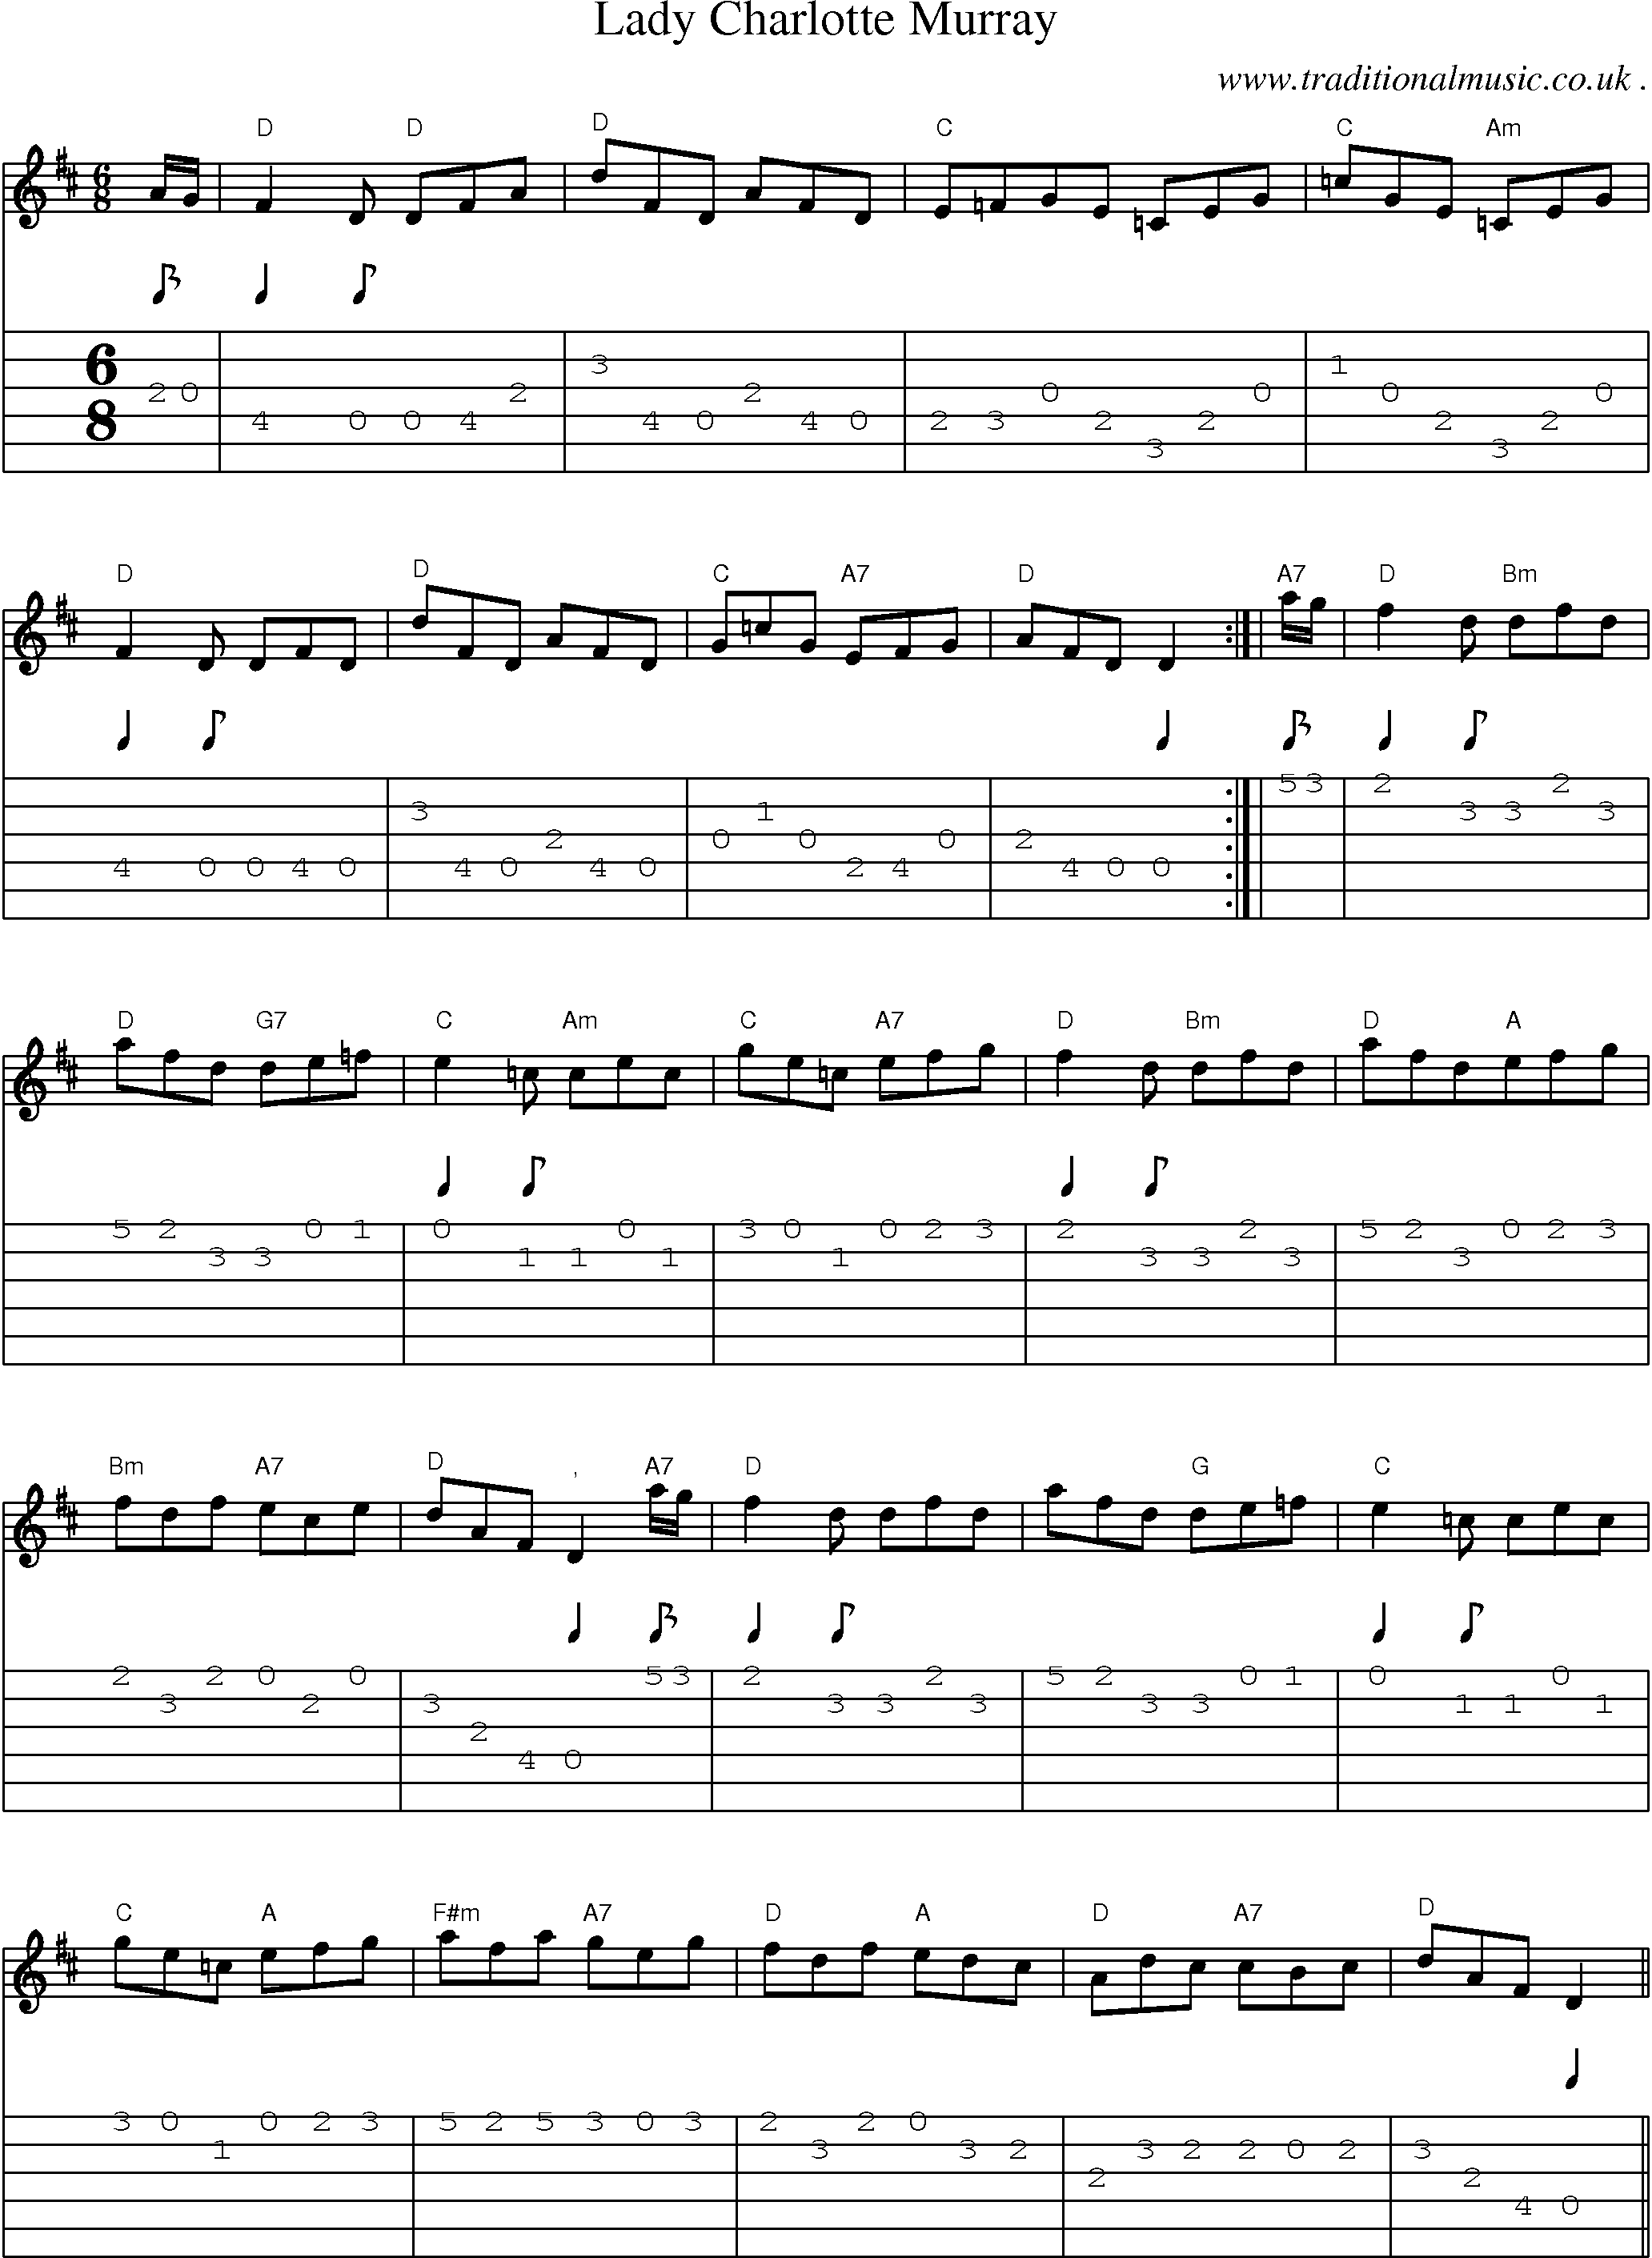 Sheet-music  score, Chords and Guitar Tabs for Lady Charlotte Murray